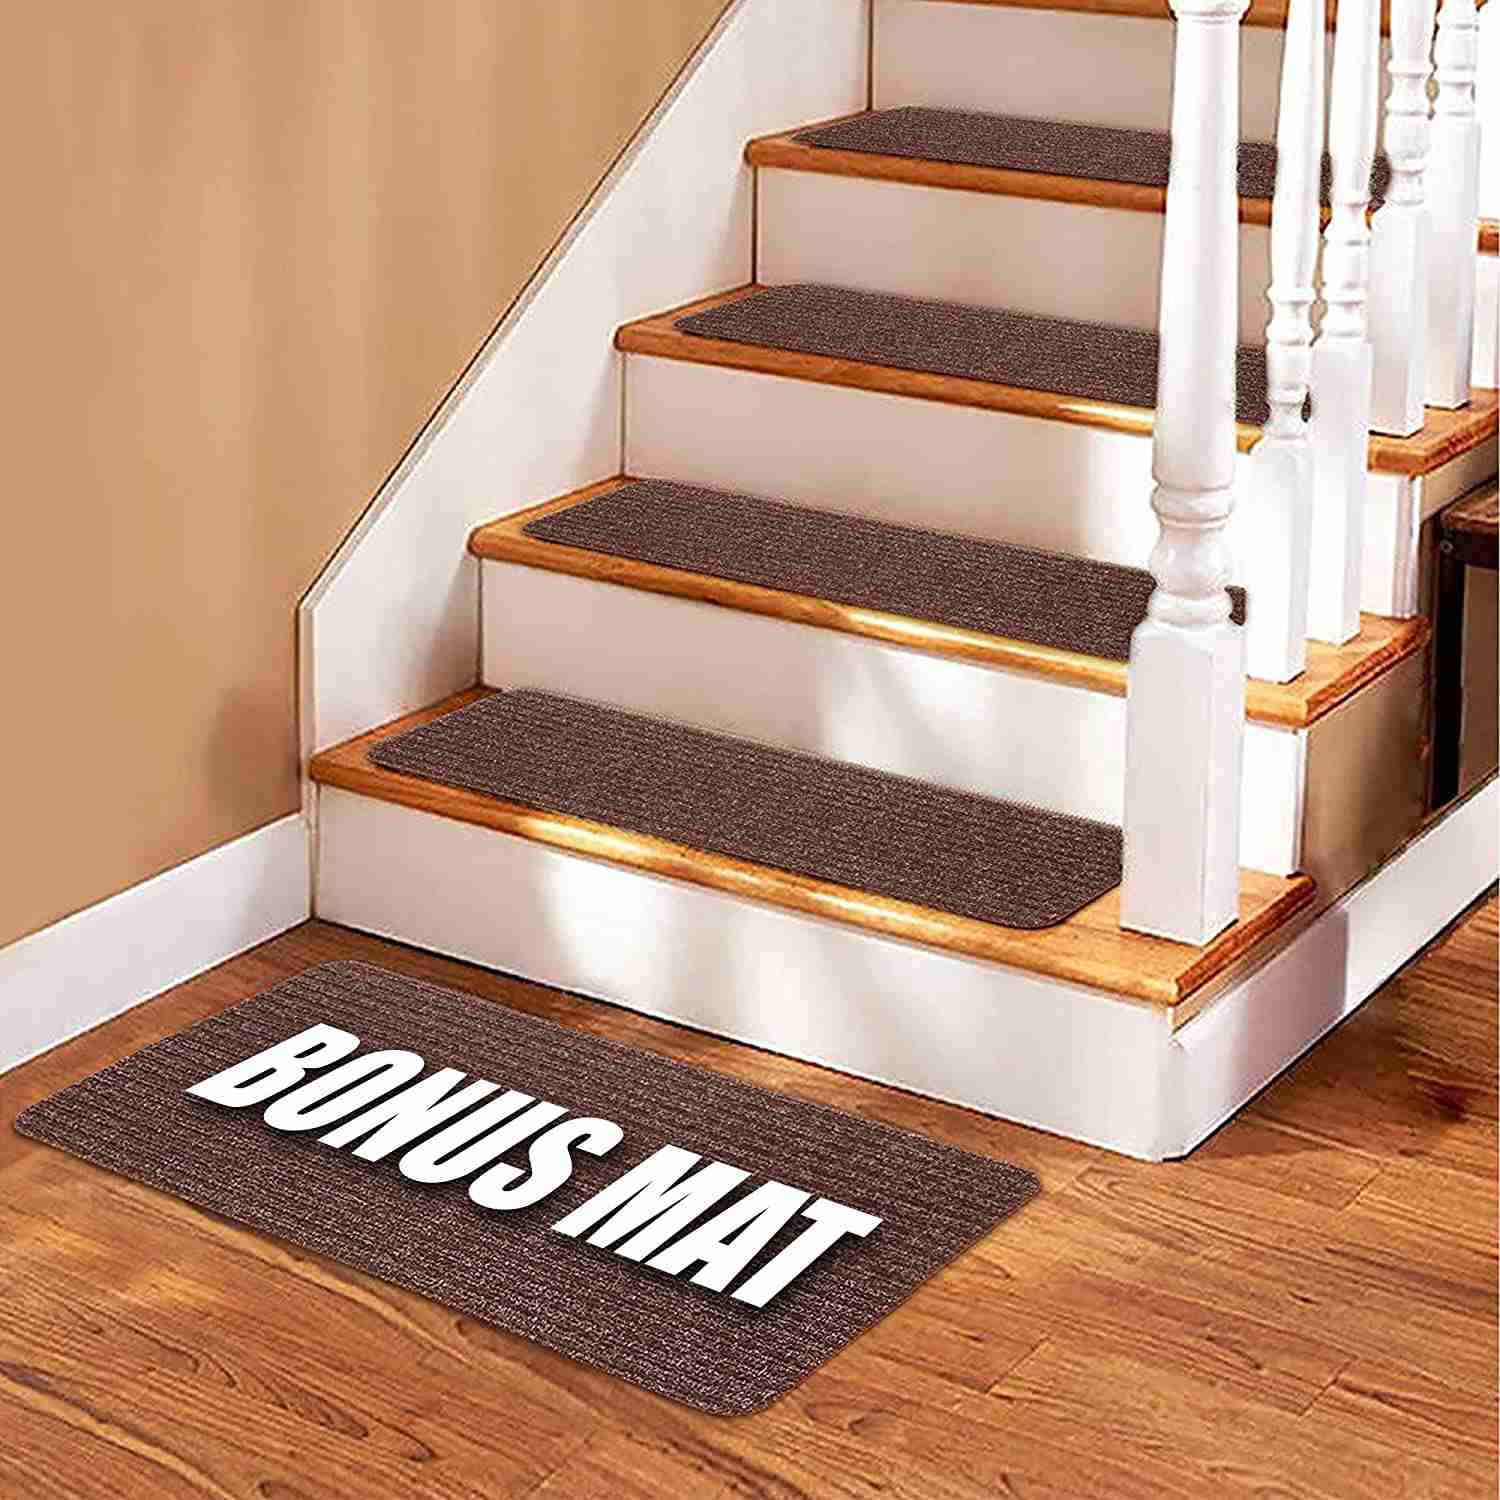 Stair-Treads-Carpet with cash back rebate